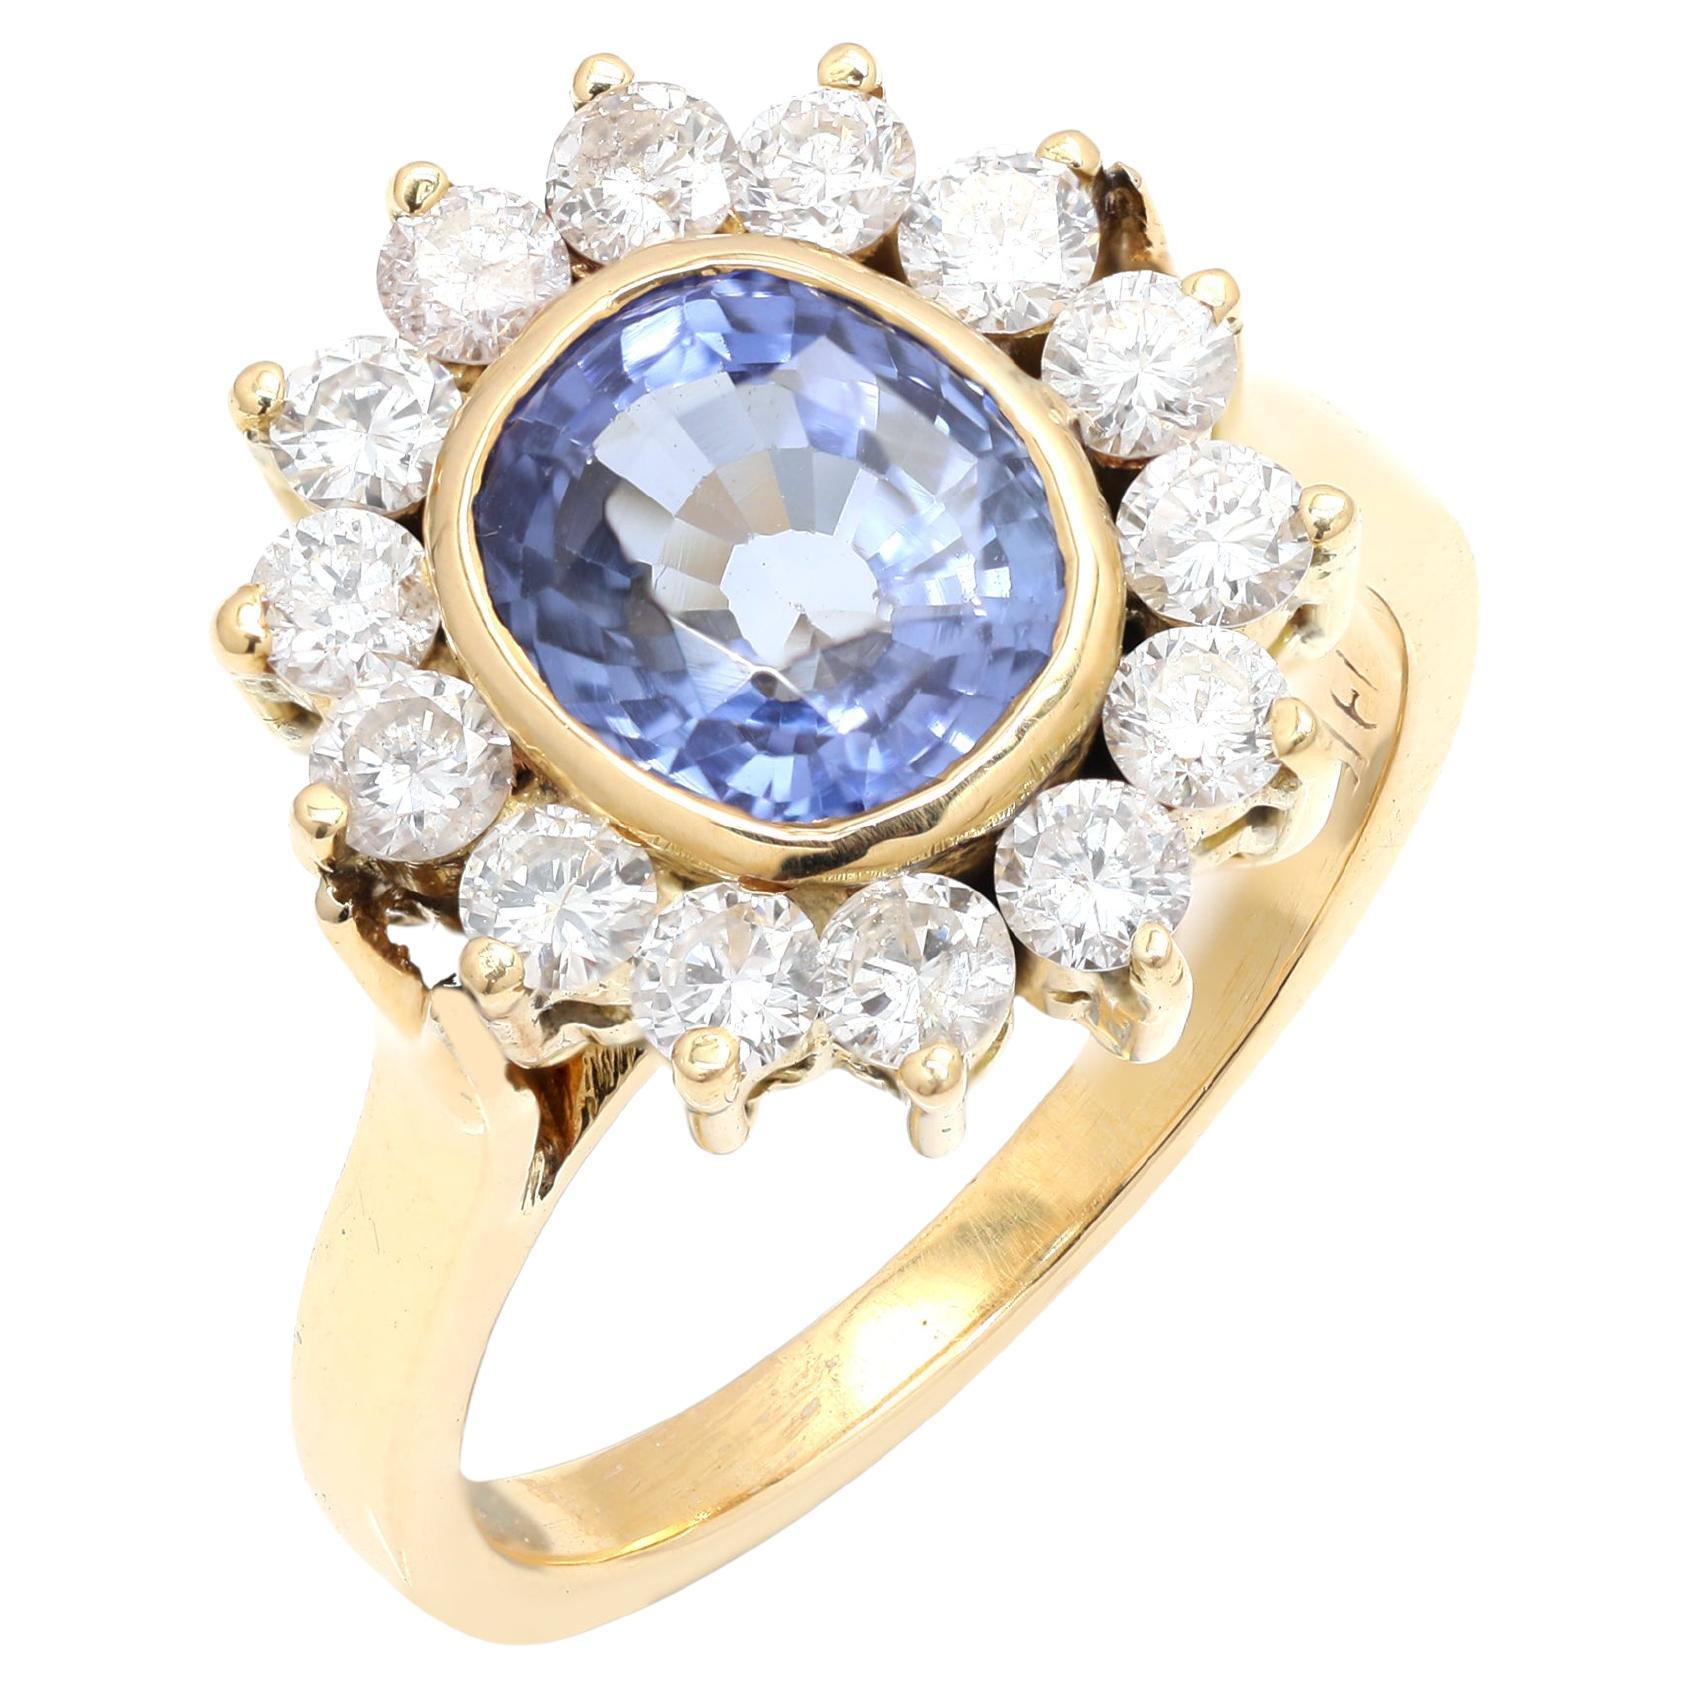 For Sale:  3ct Oval Deep Blue Sapphire Wedding Women Ring with Diamond in 18k Yellow Gold